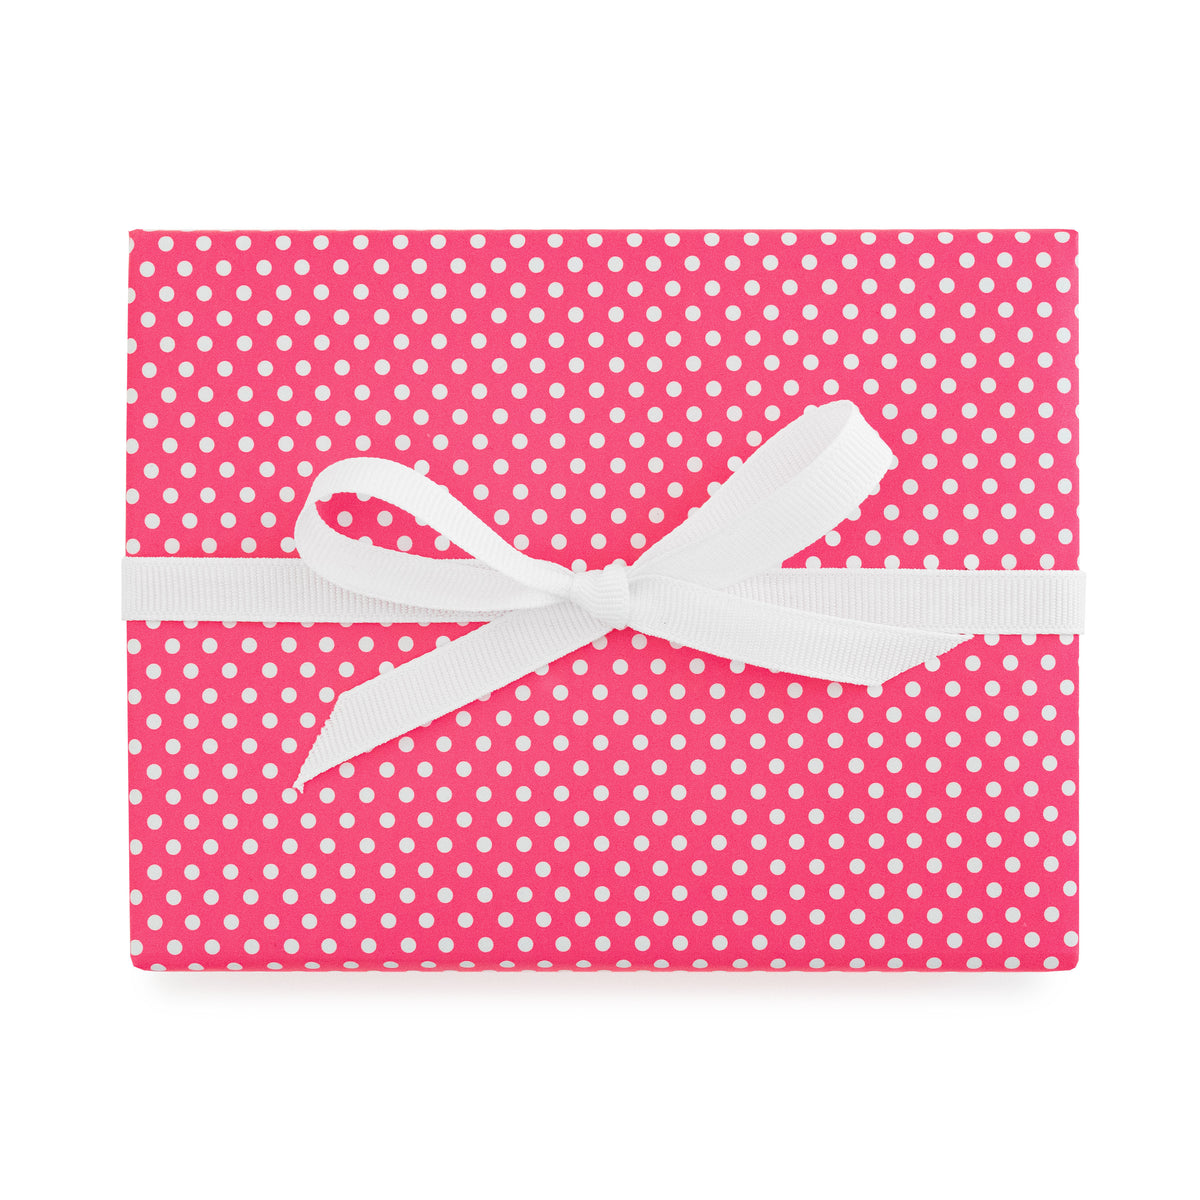 gift wrapped with neon dot gift wrap